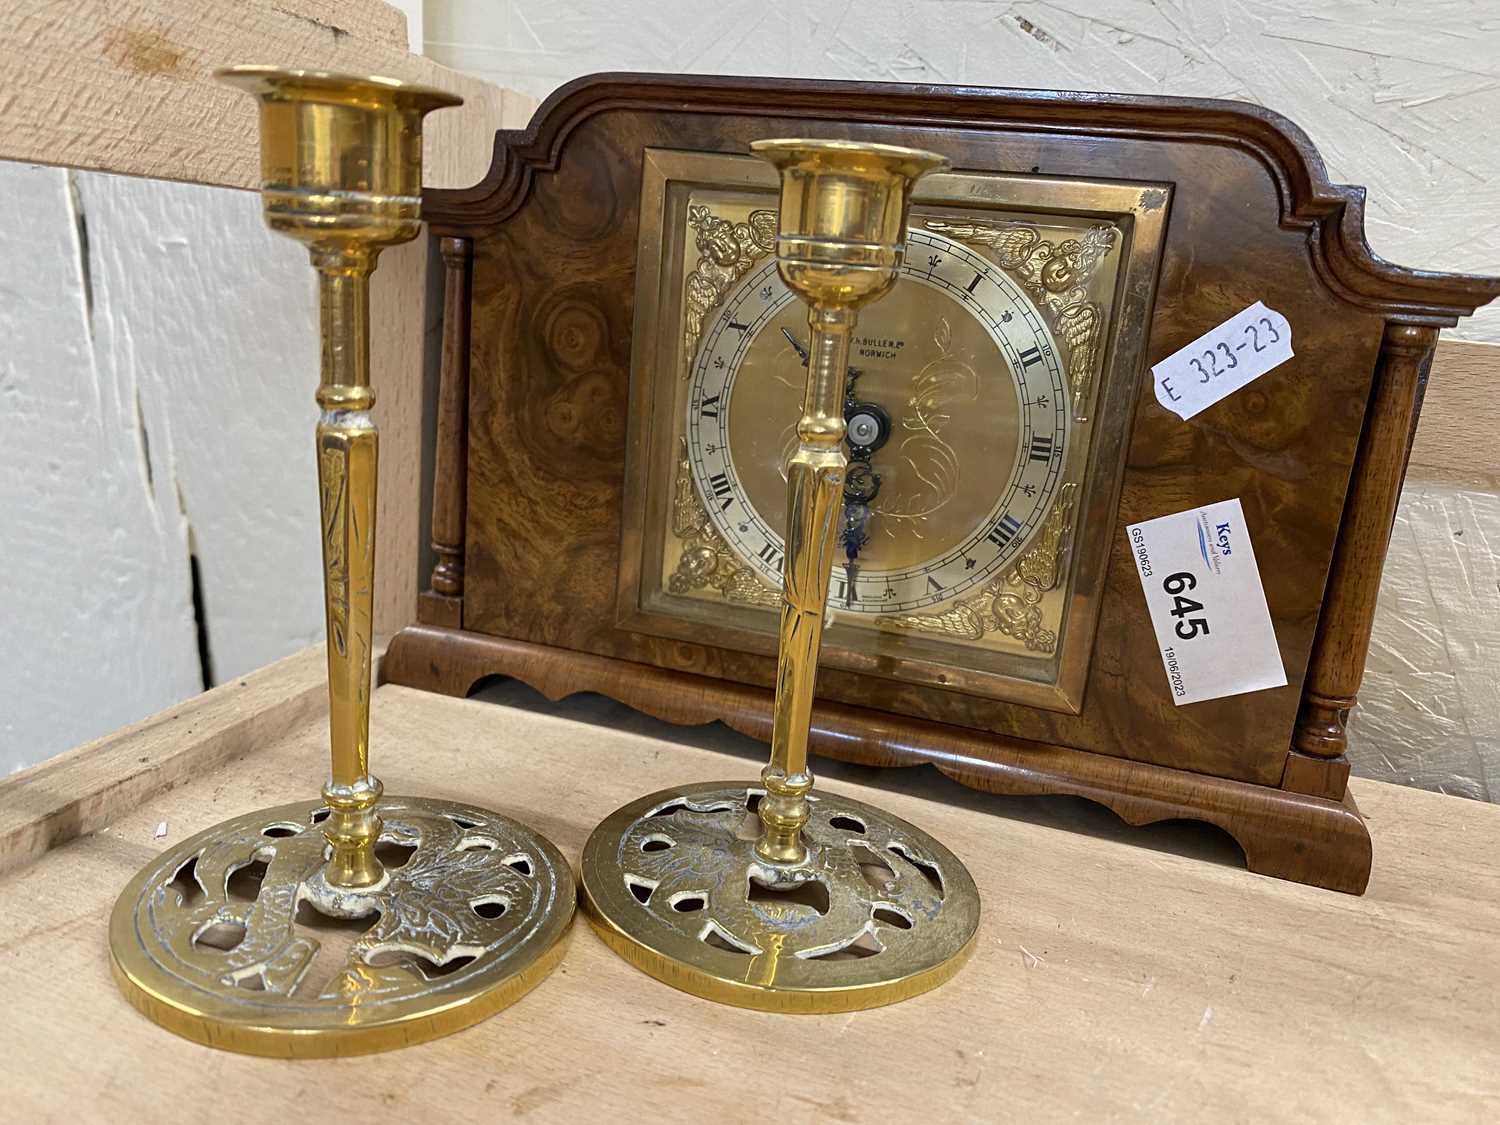 Wooden mantel clock with square brass dial and a pair of dwarf brass candlesticks